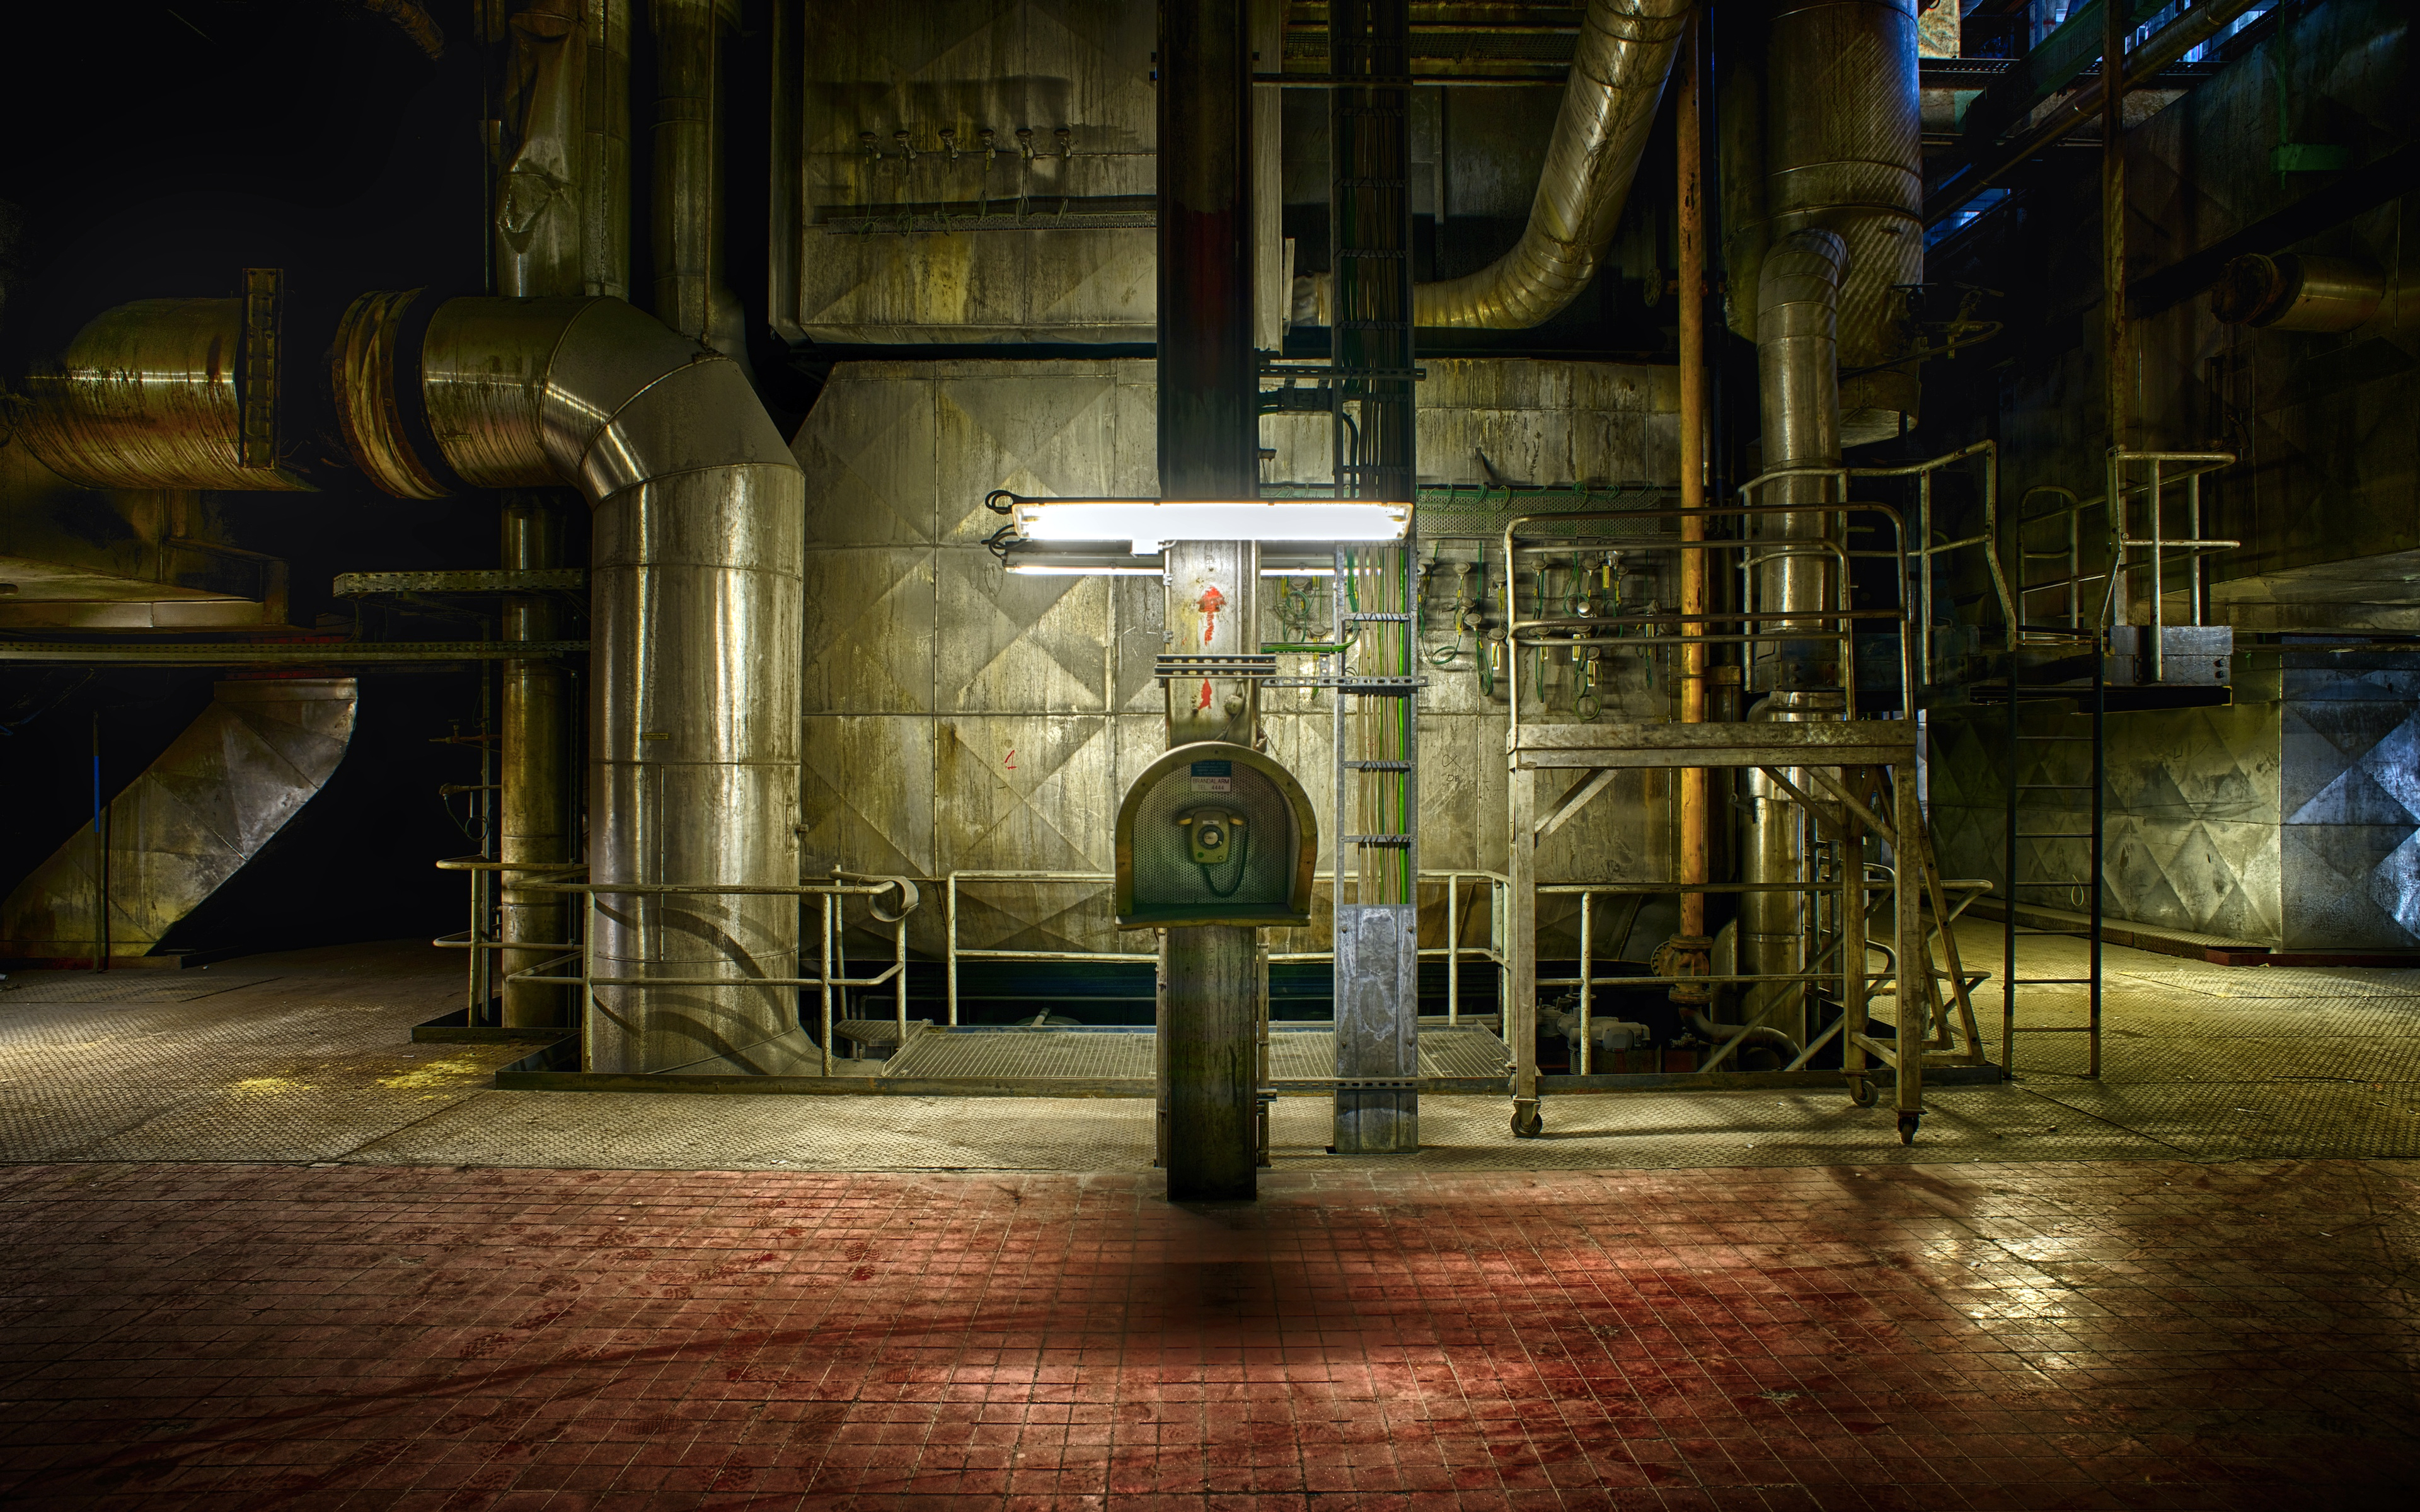 man made, power plant, abandoned, factory, industrial, telephone